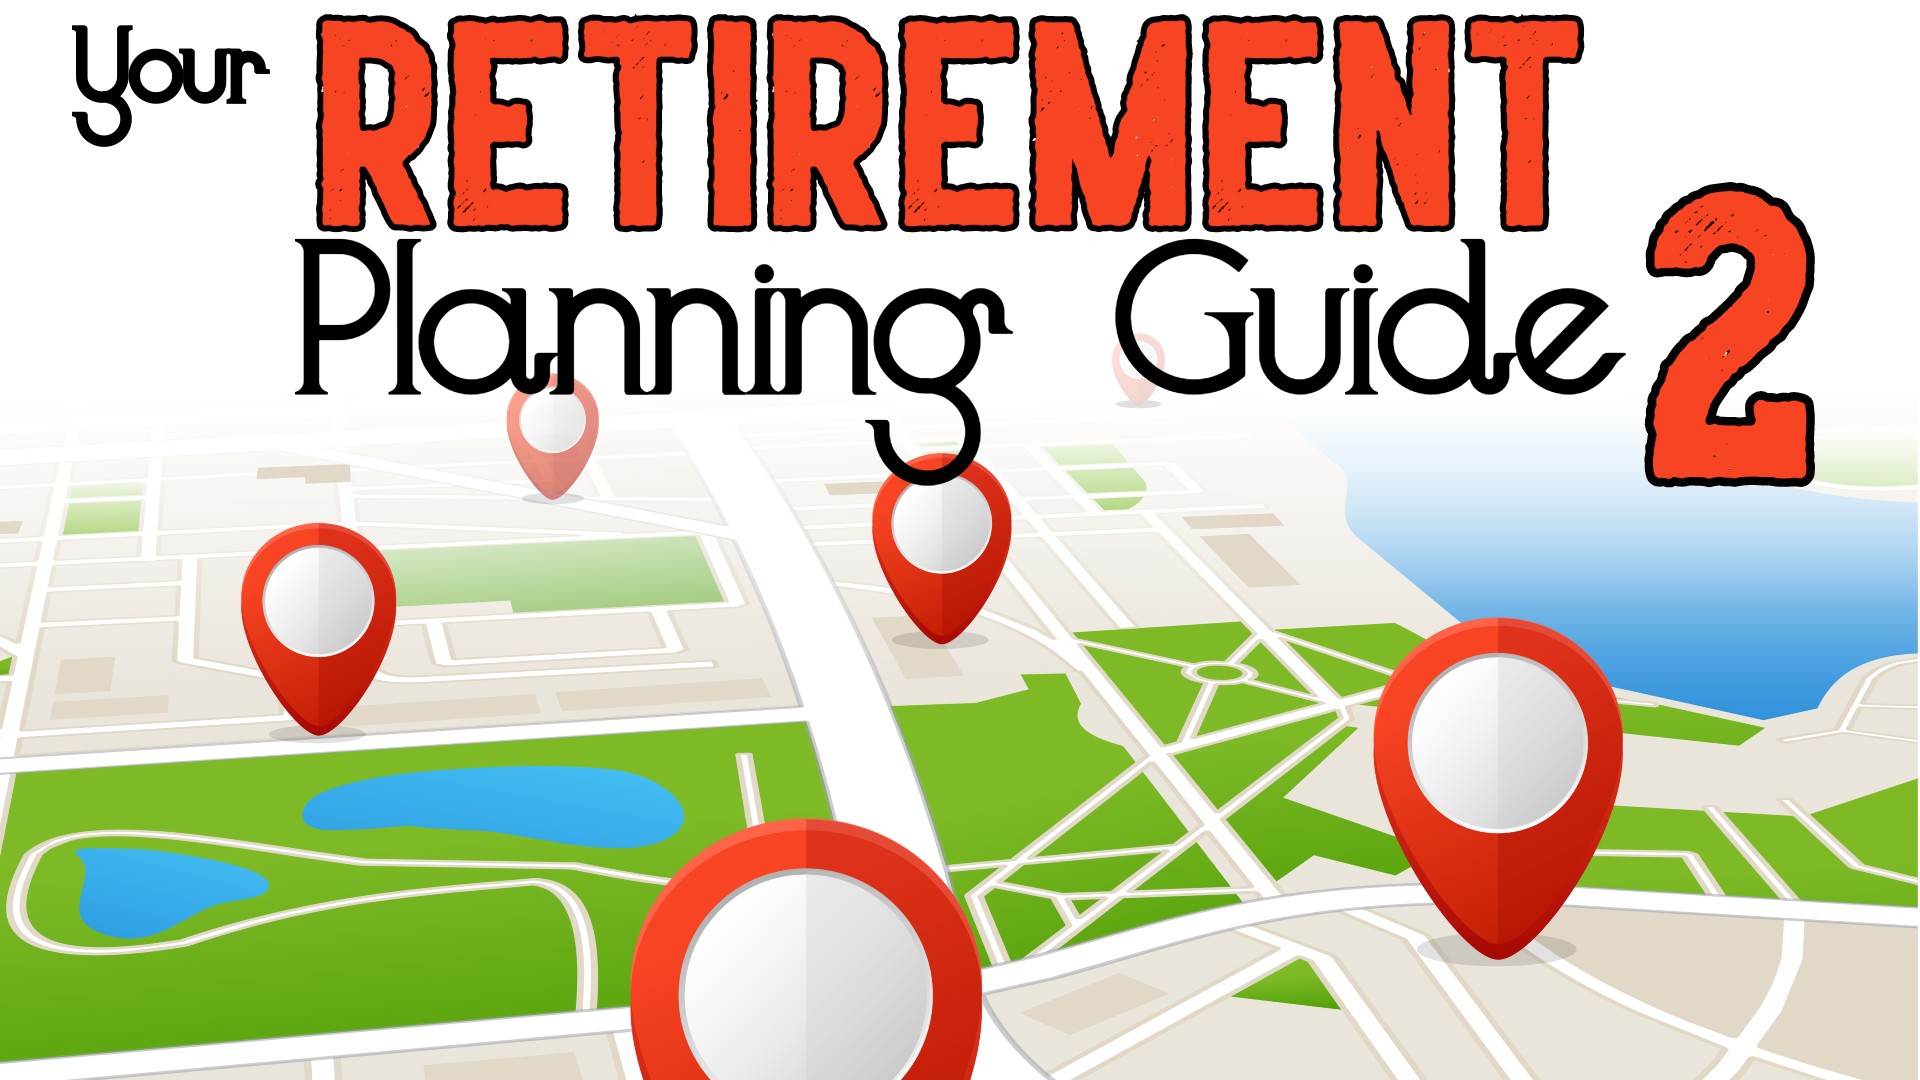 Your Retirement Planning Guide 2